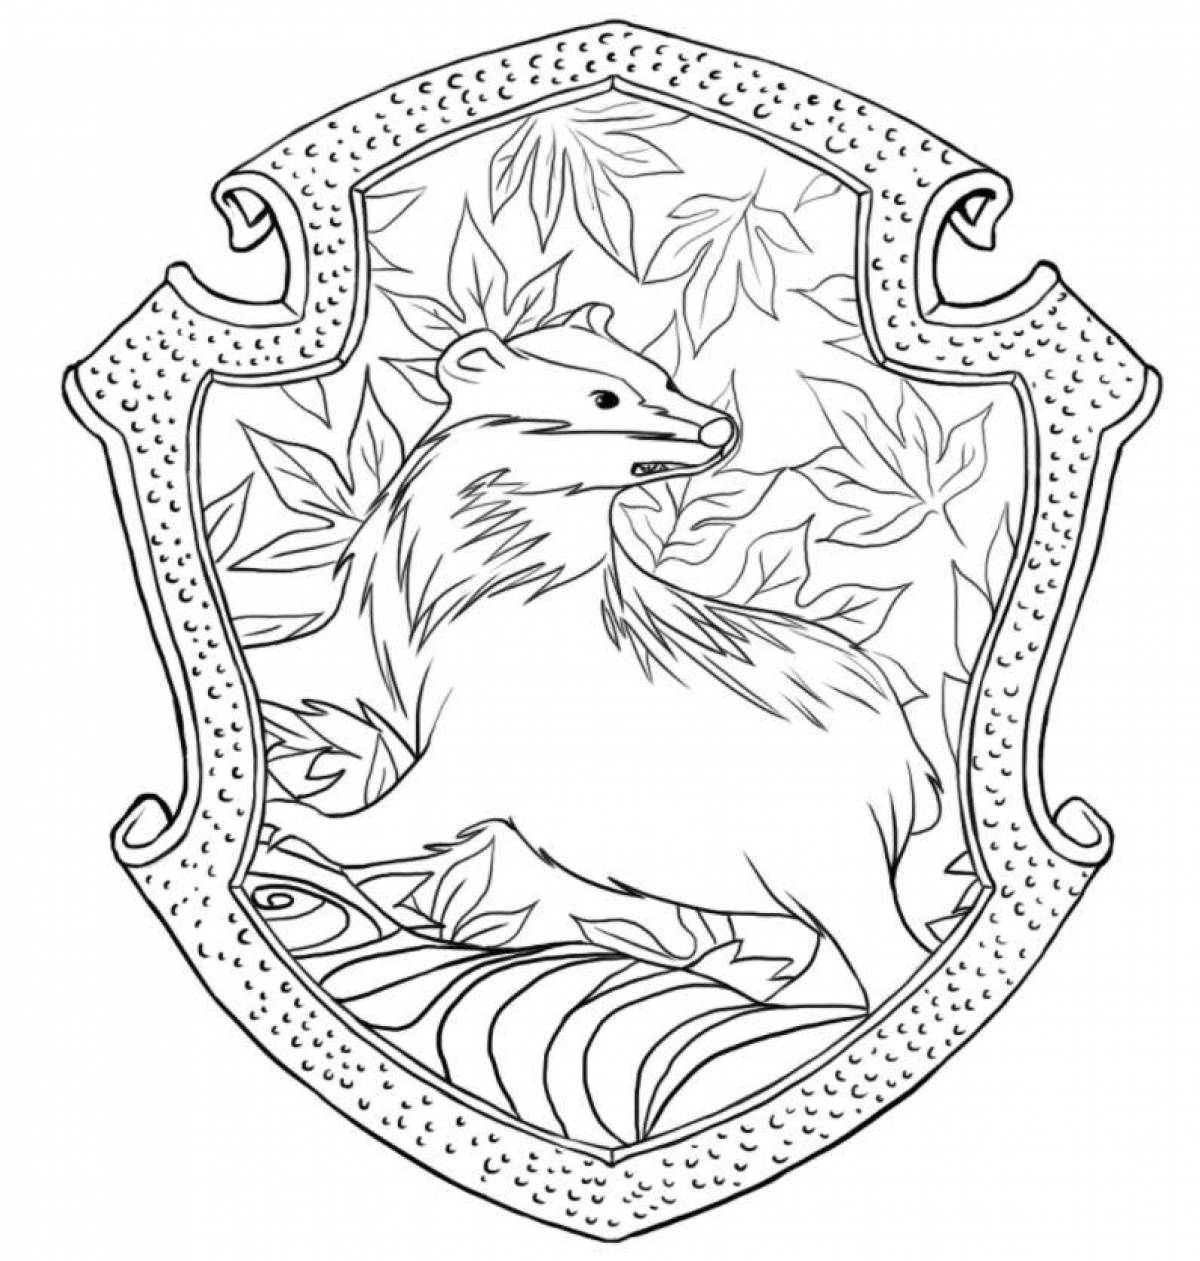 Dazzling Slytherin coloring page